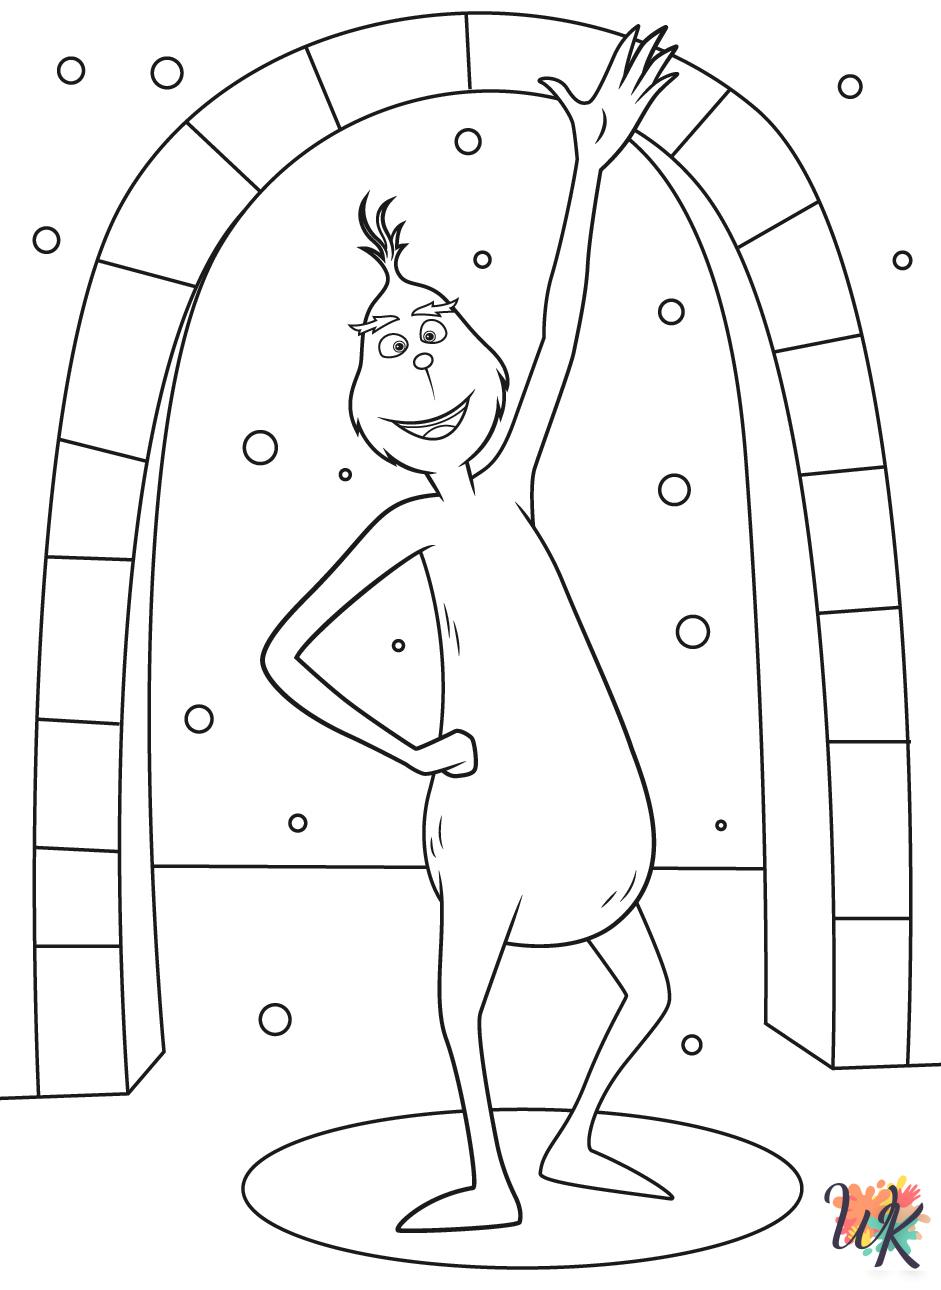 Grinch coloring pages for kids